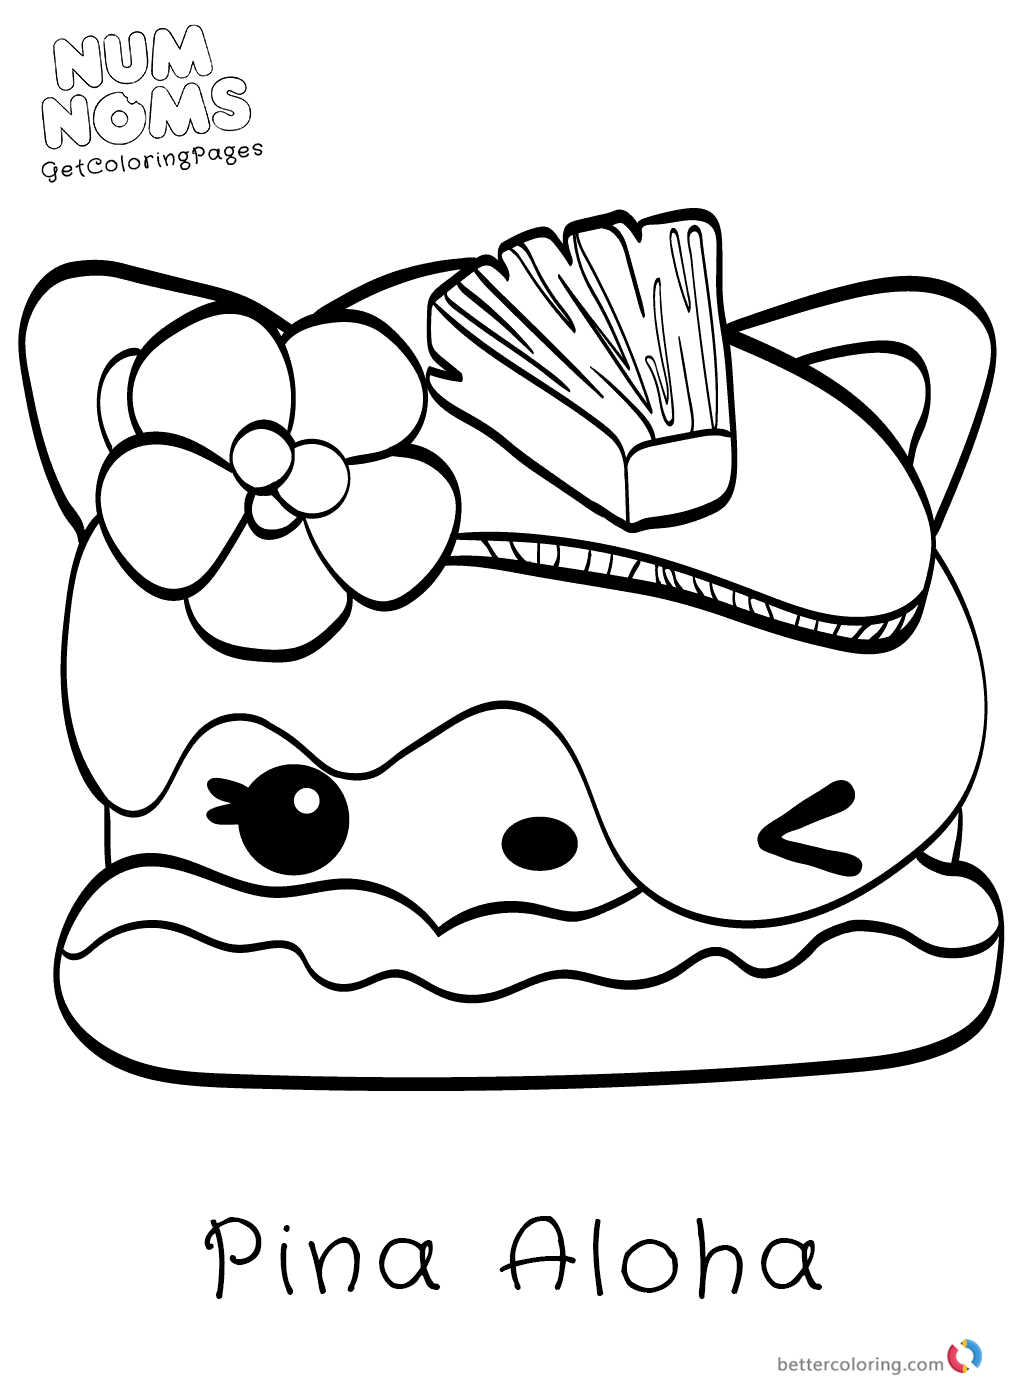 this coloring page Print this Coloring Page Num Noms Coloring